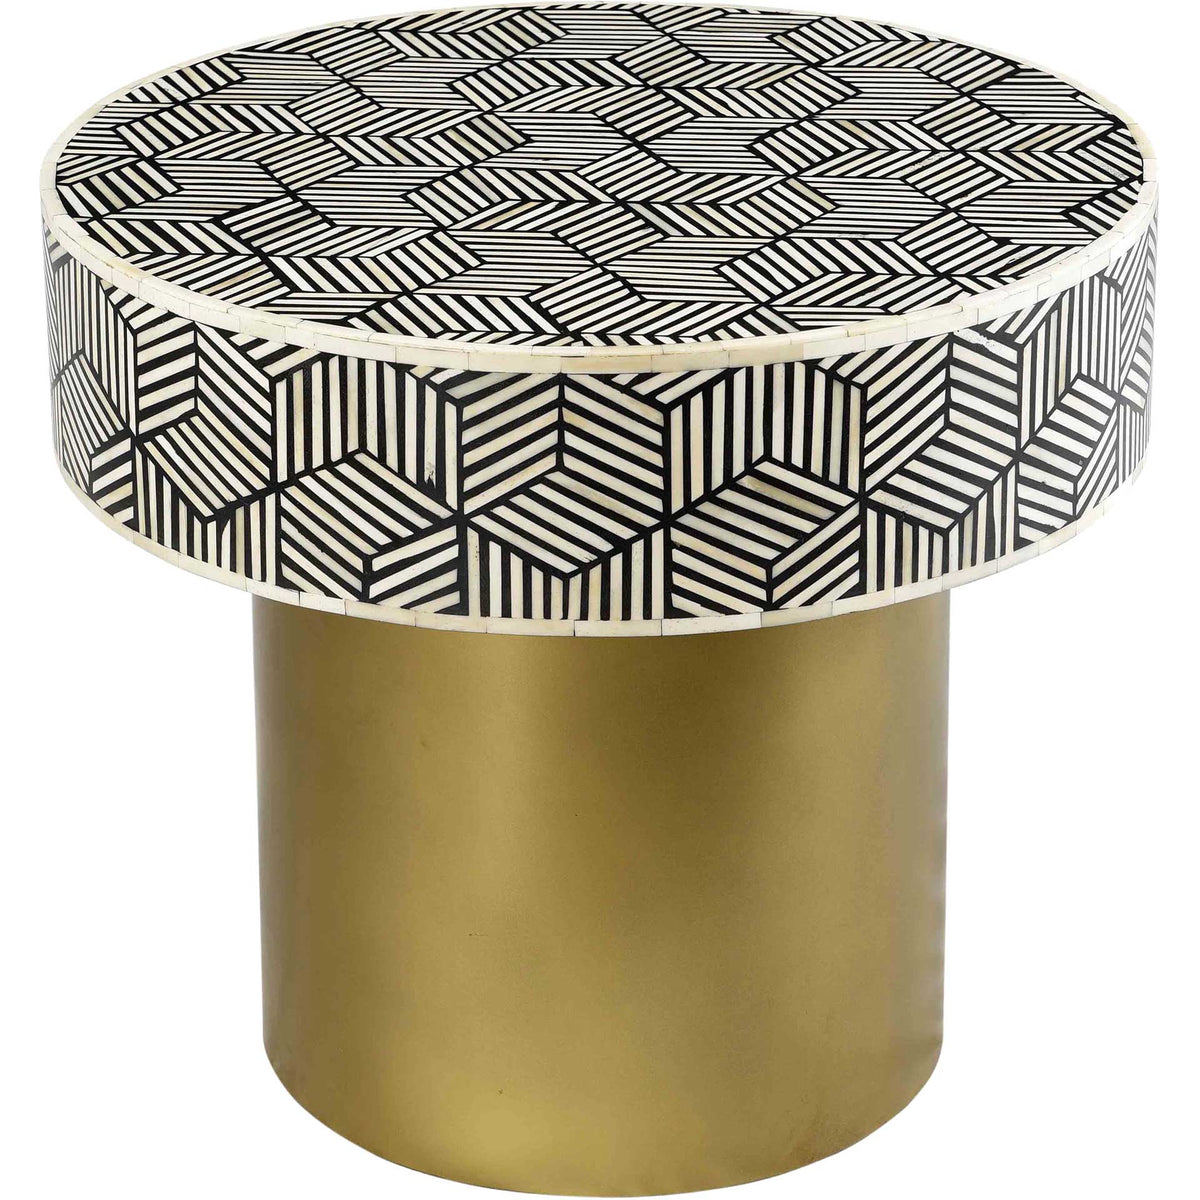 Bowen Inlay Round Side Table Black And White